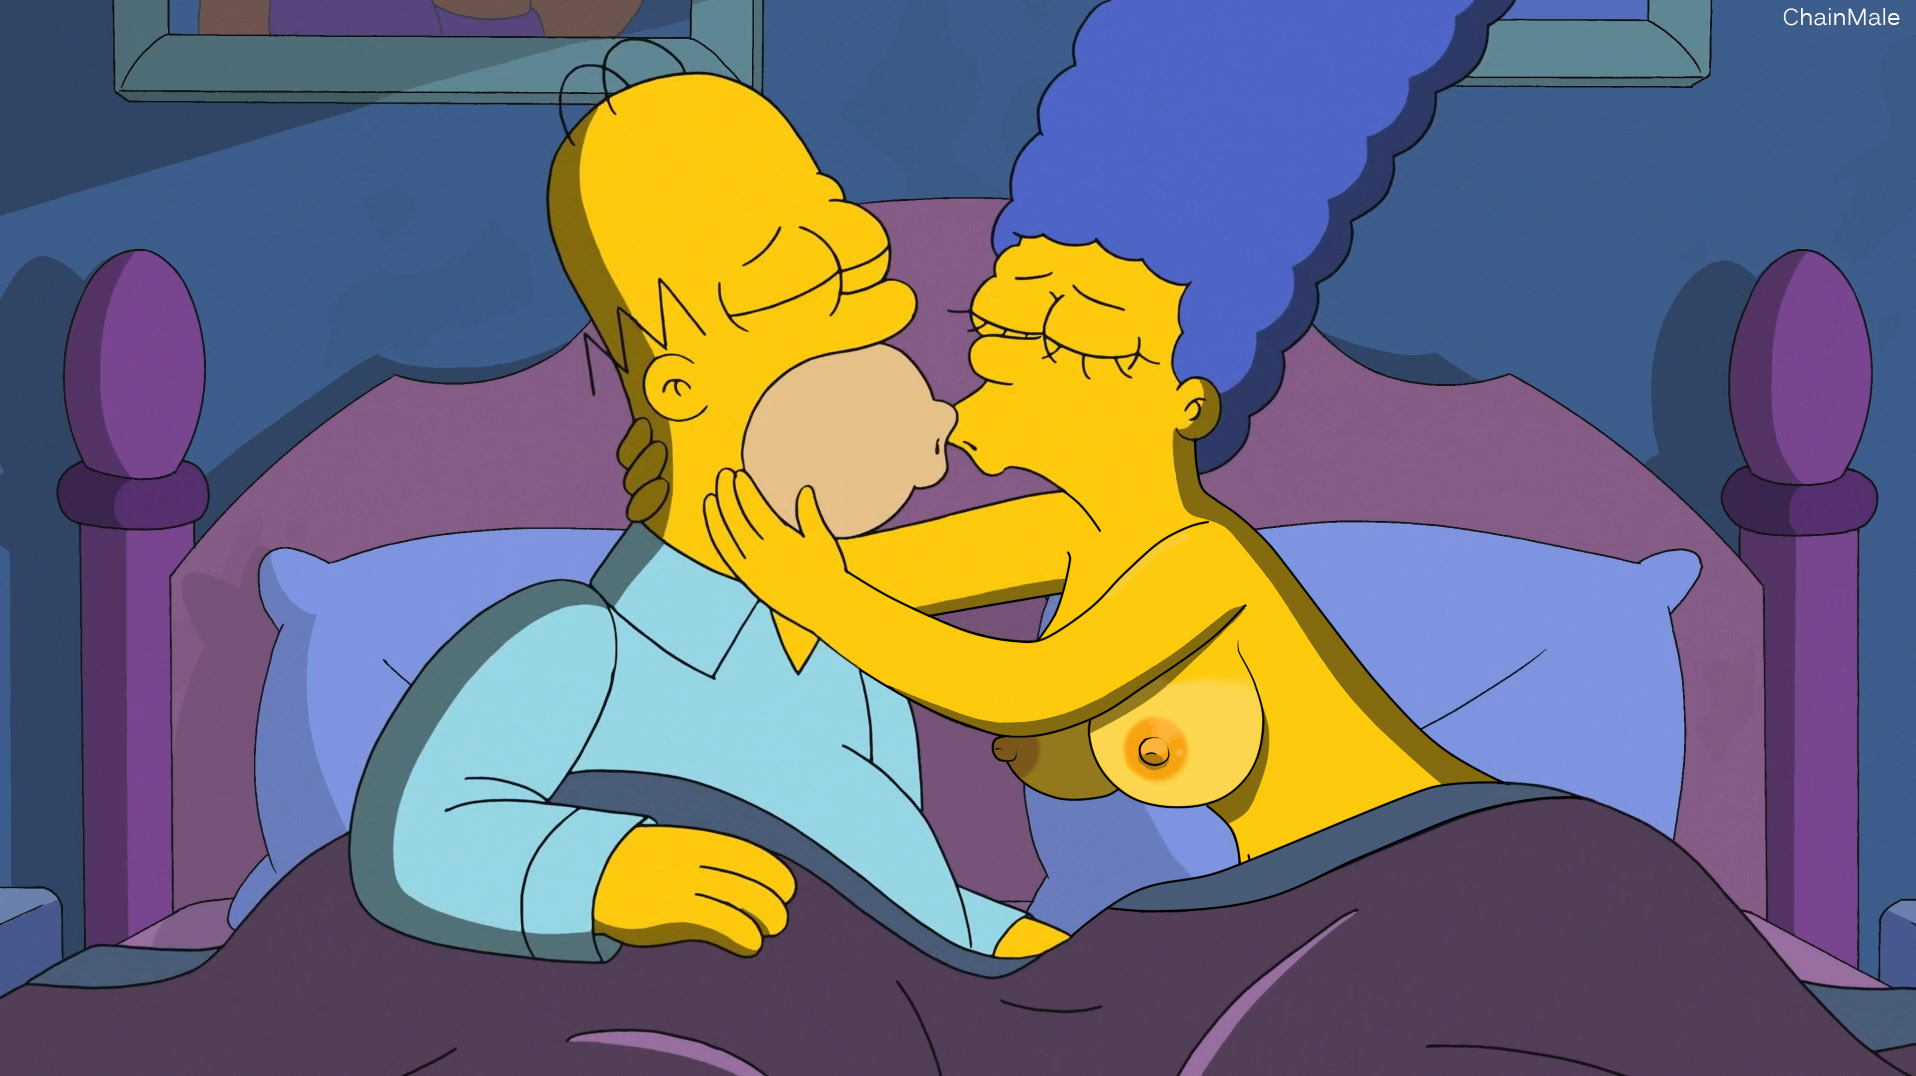 1916px x 1076px - pic1334156: ChainMale â€“ Homer Simpson â€“ Marge Simpson â€“ The Simpsons - Simpsons  Adult Comics